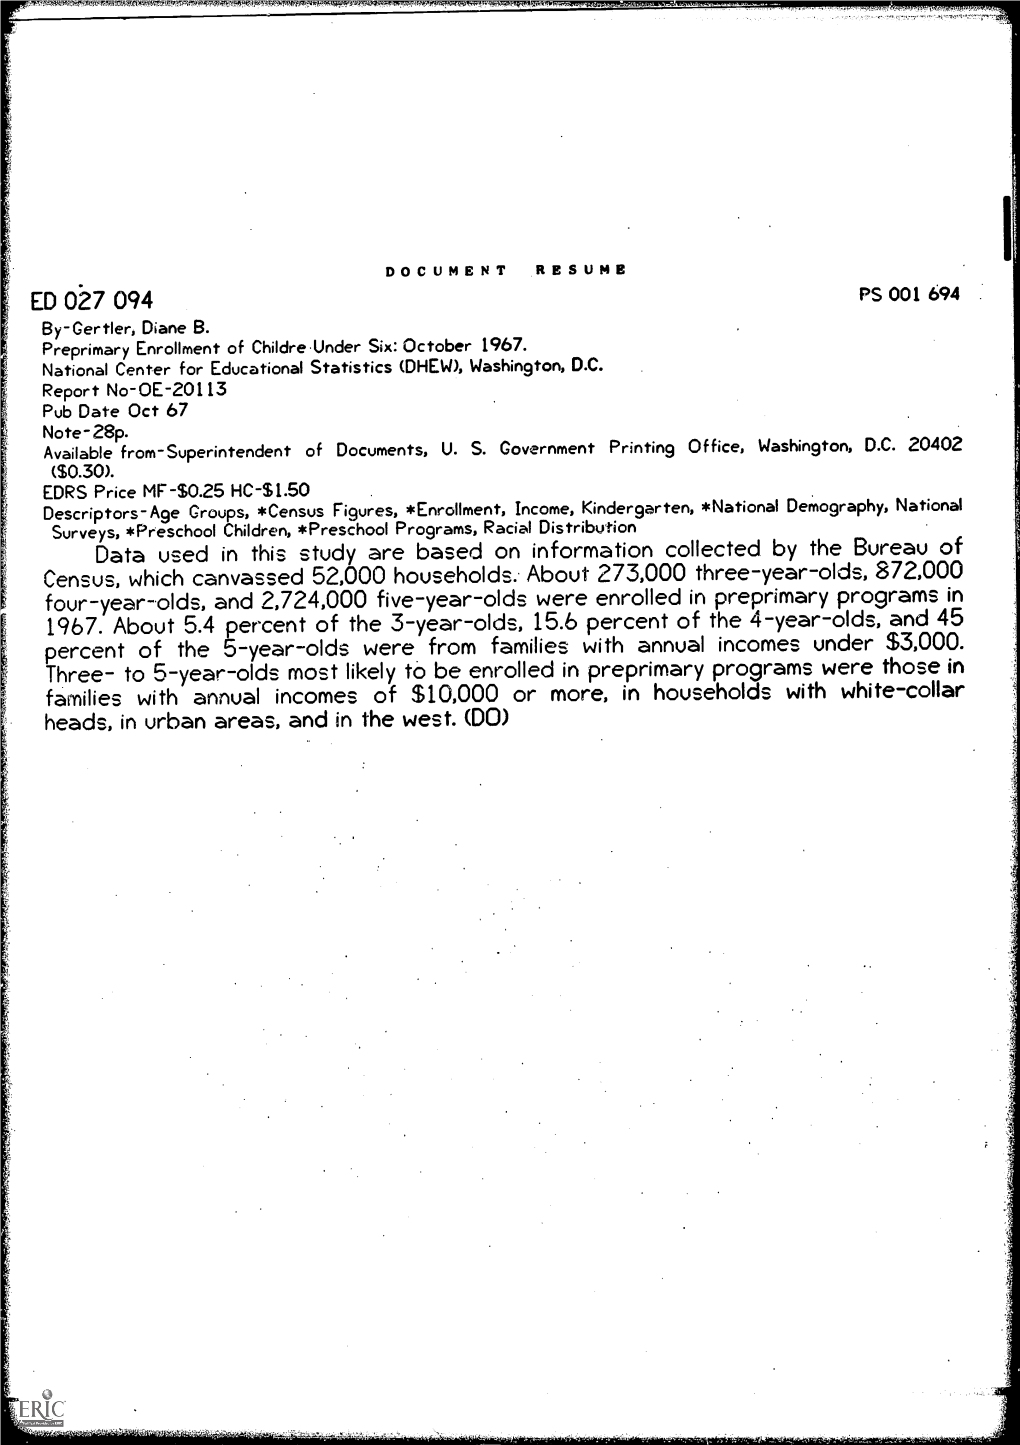 DOCUMENT RESUME ED 027 094 PS 001 694 By-Gertler, Diane B